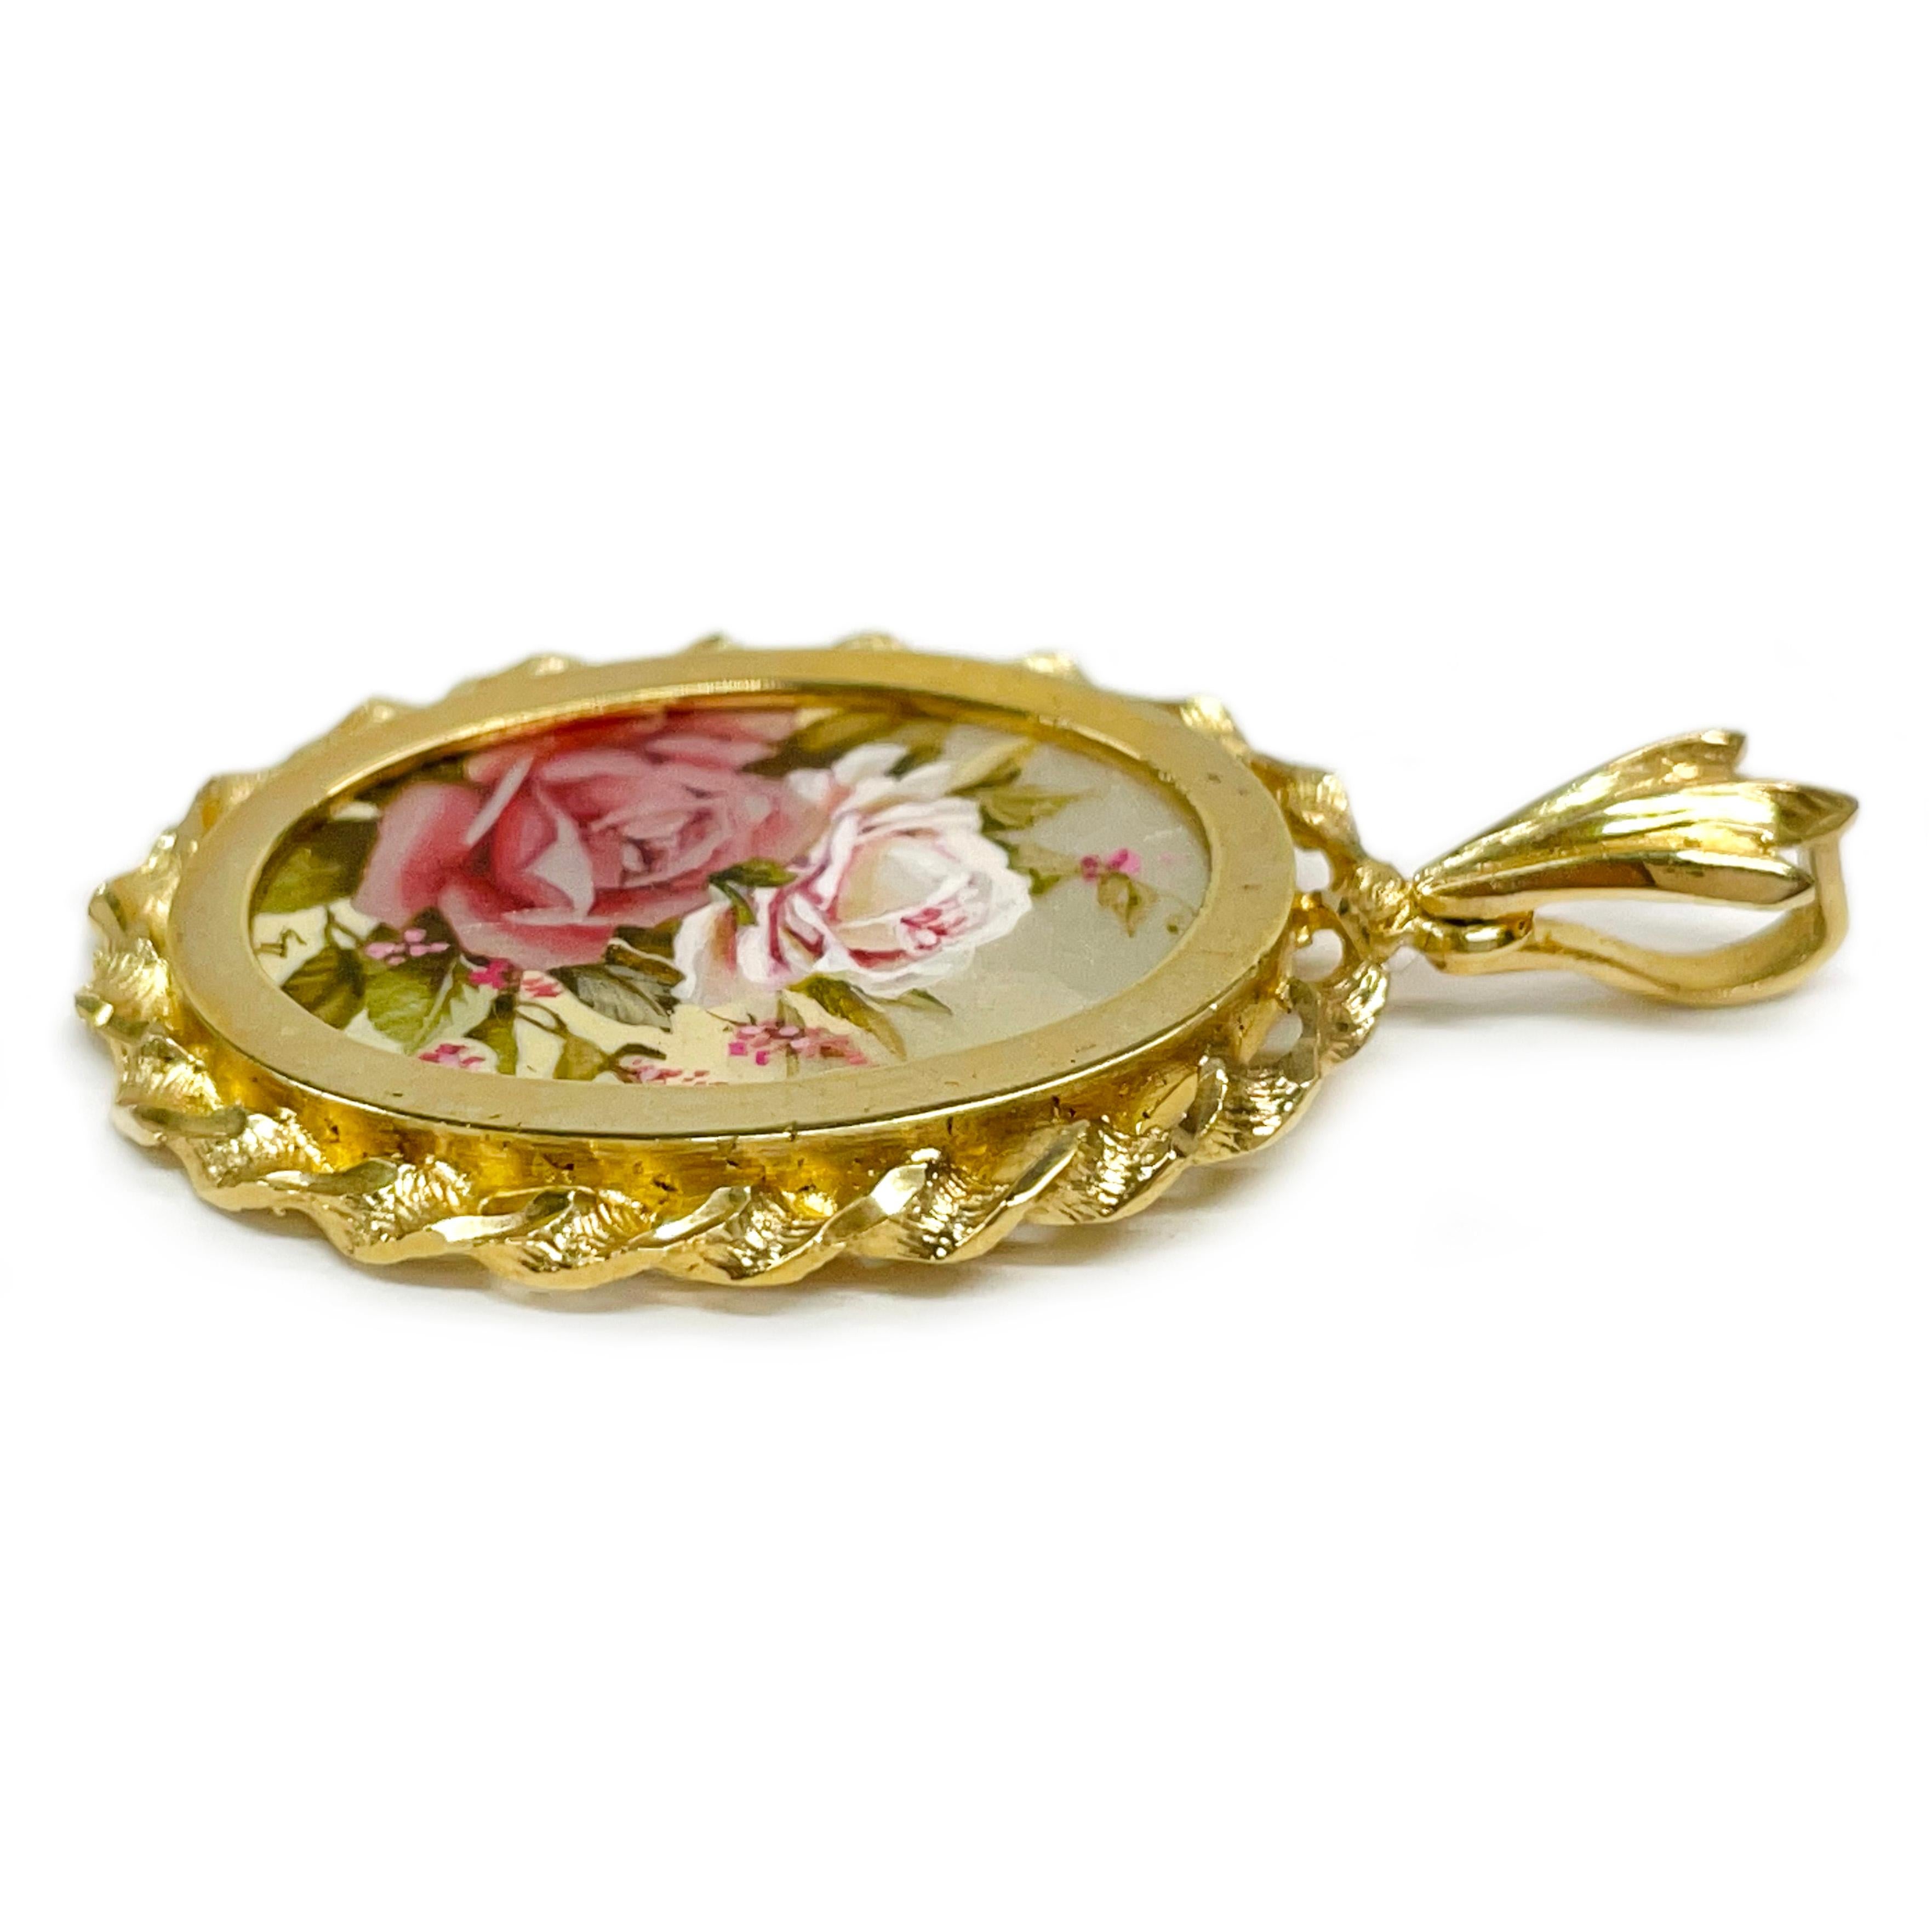 Contemporary 14 Karat Roses Masterpiece Hand Painted MOP Pendant #0679 For Sale